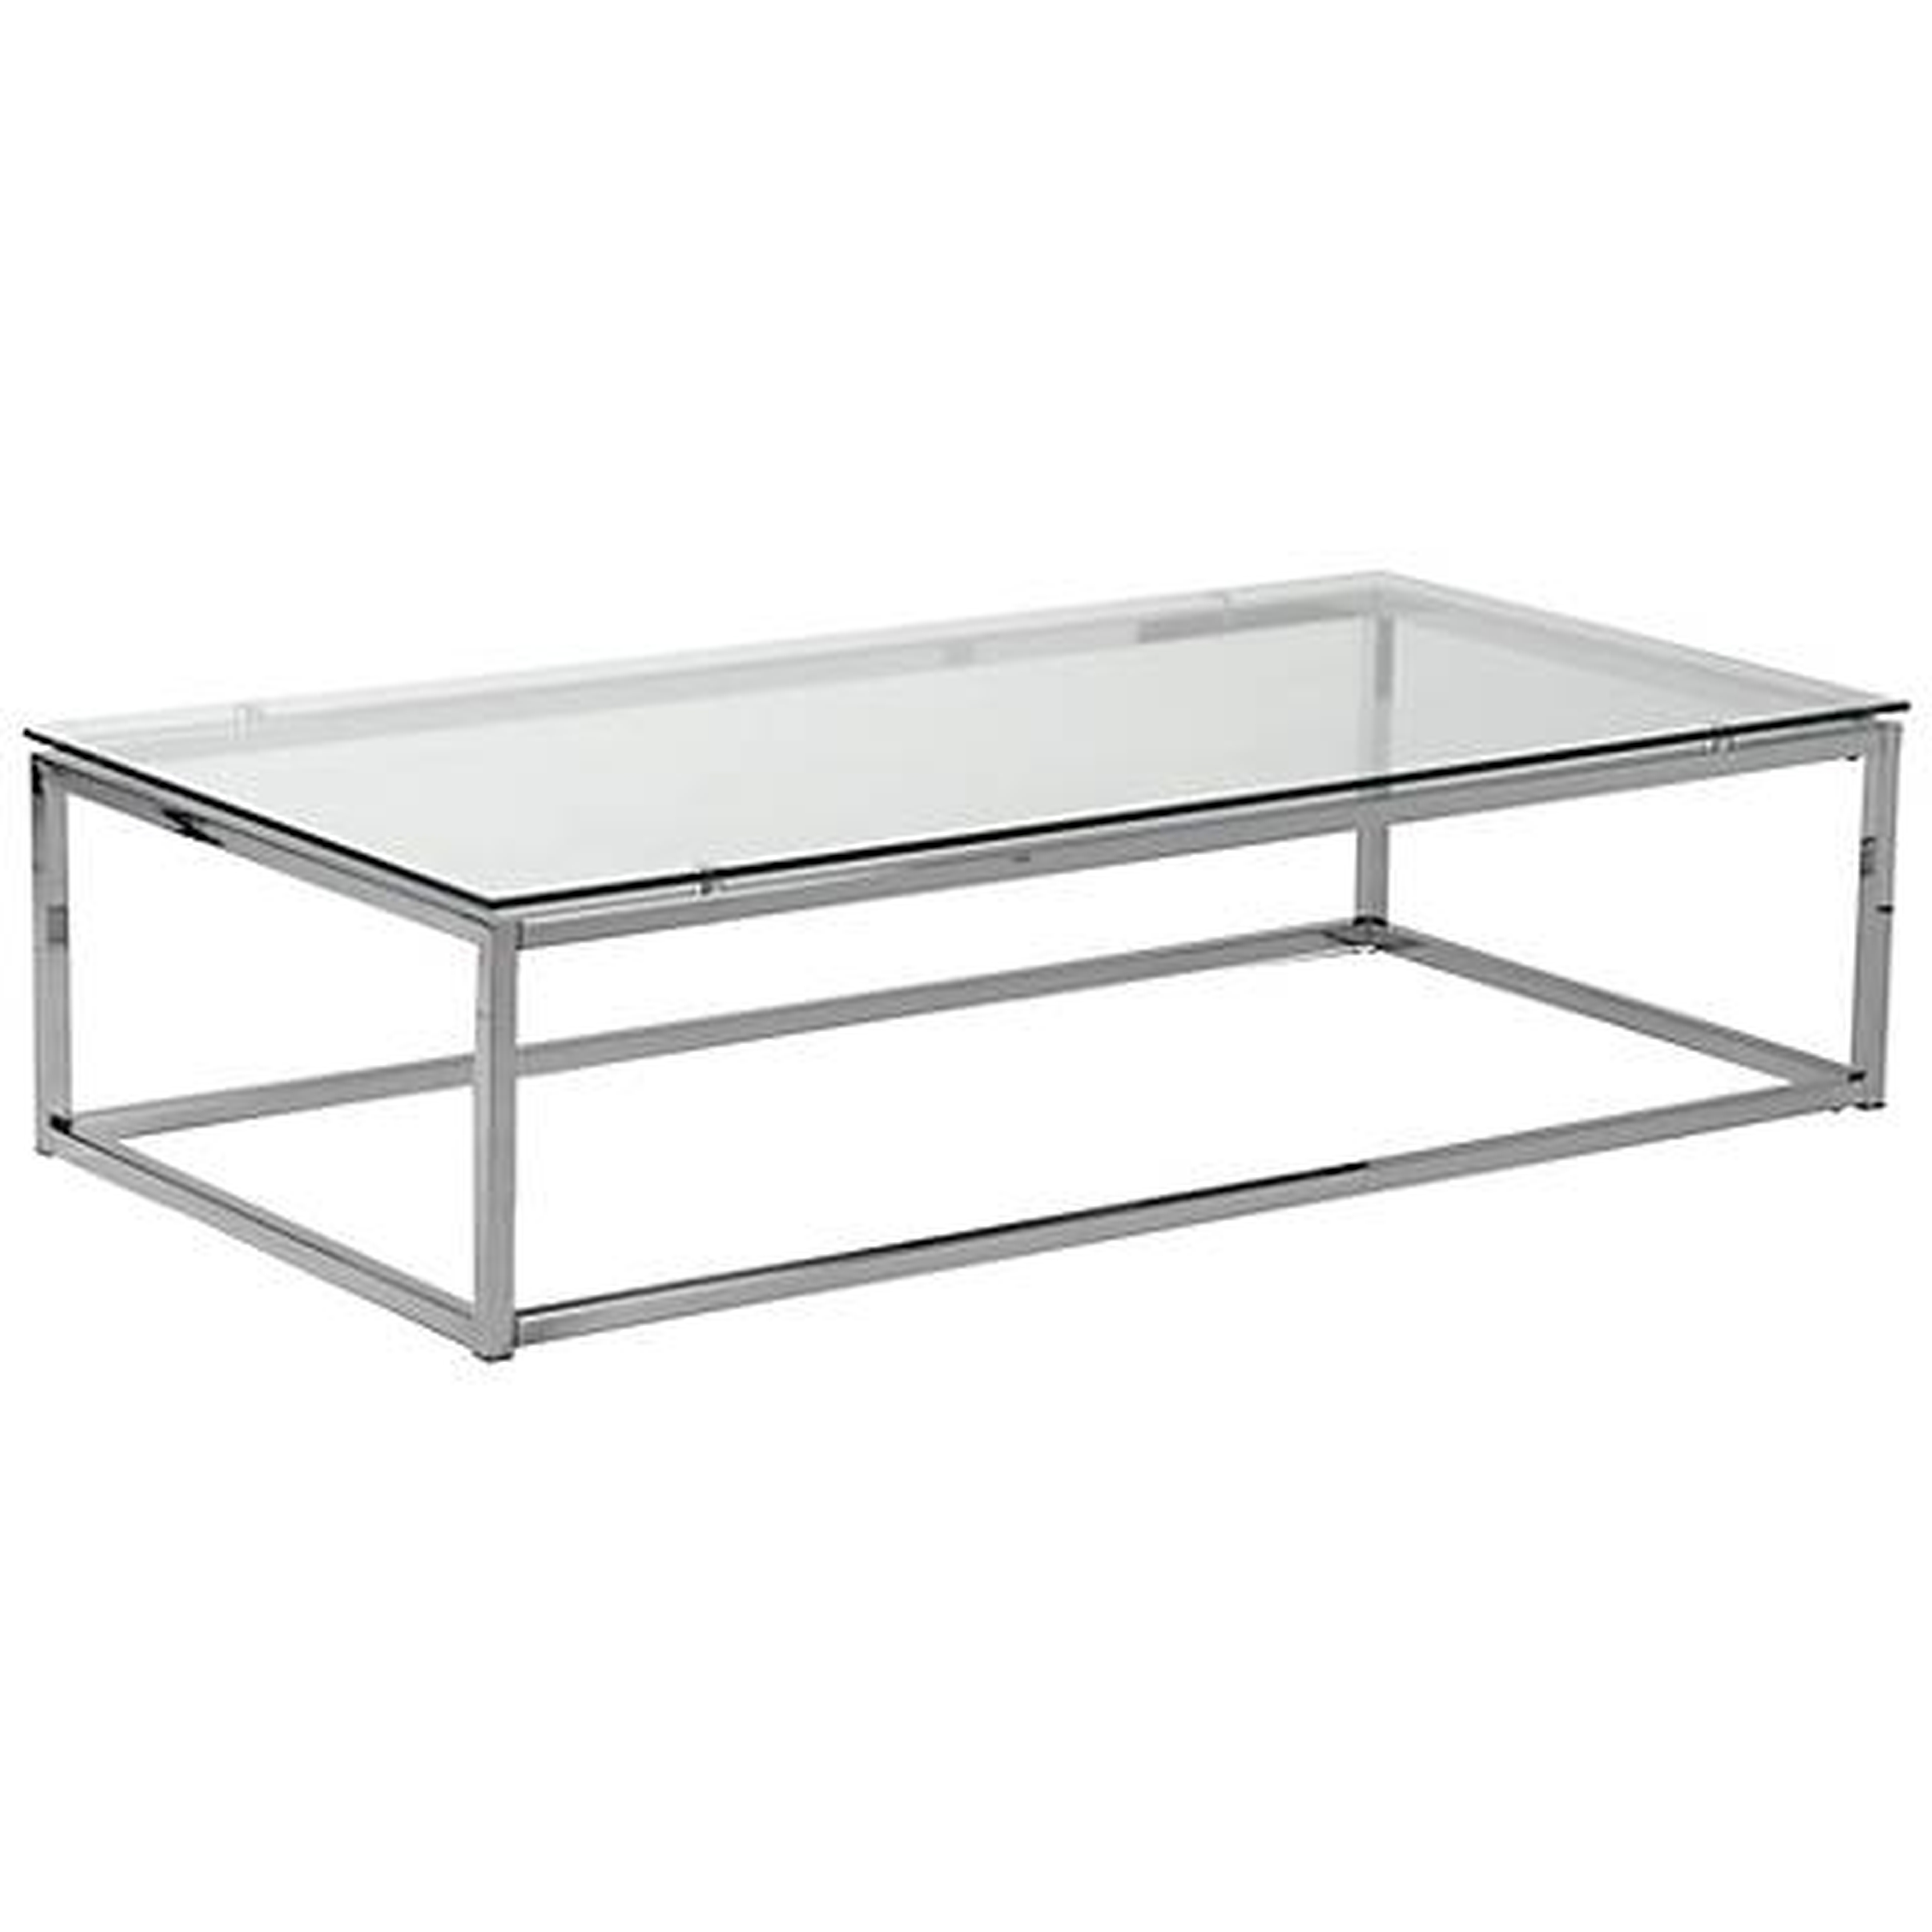 Sandor Rectangular Chrome and Glass Coffee Table clear - Lamps Plus